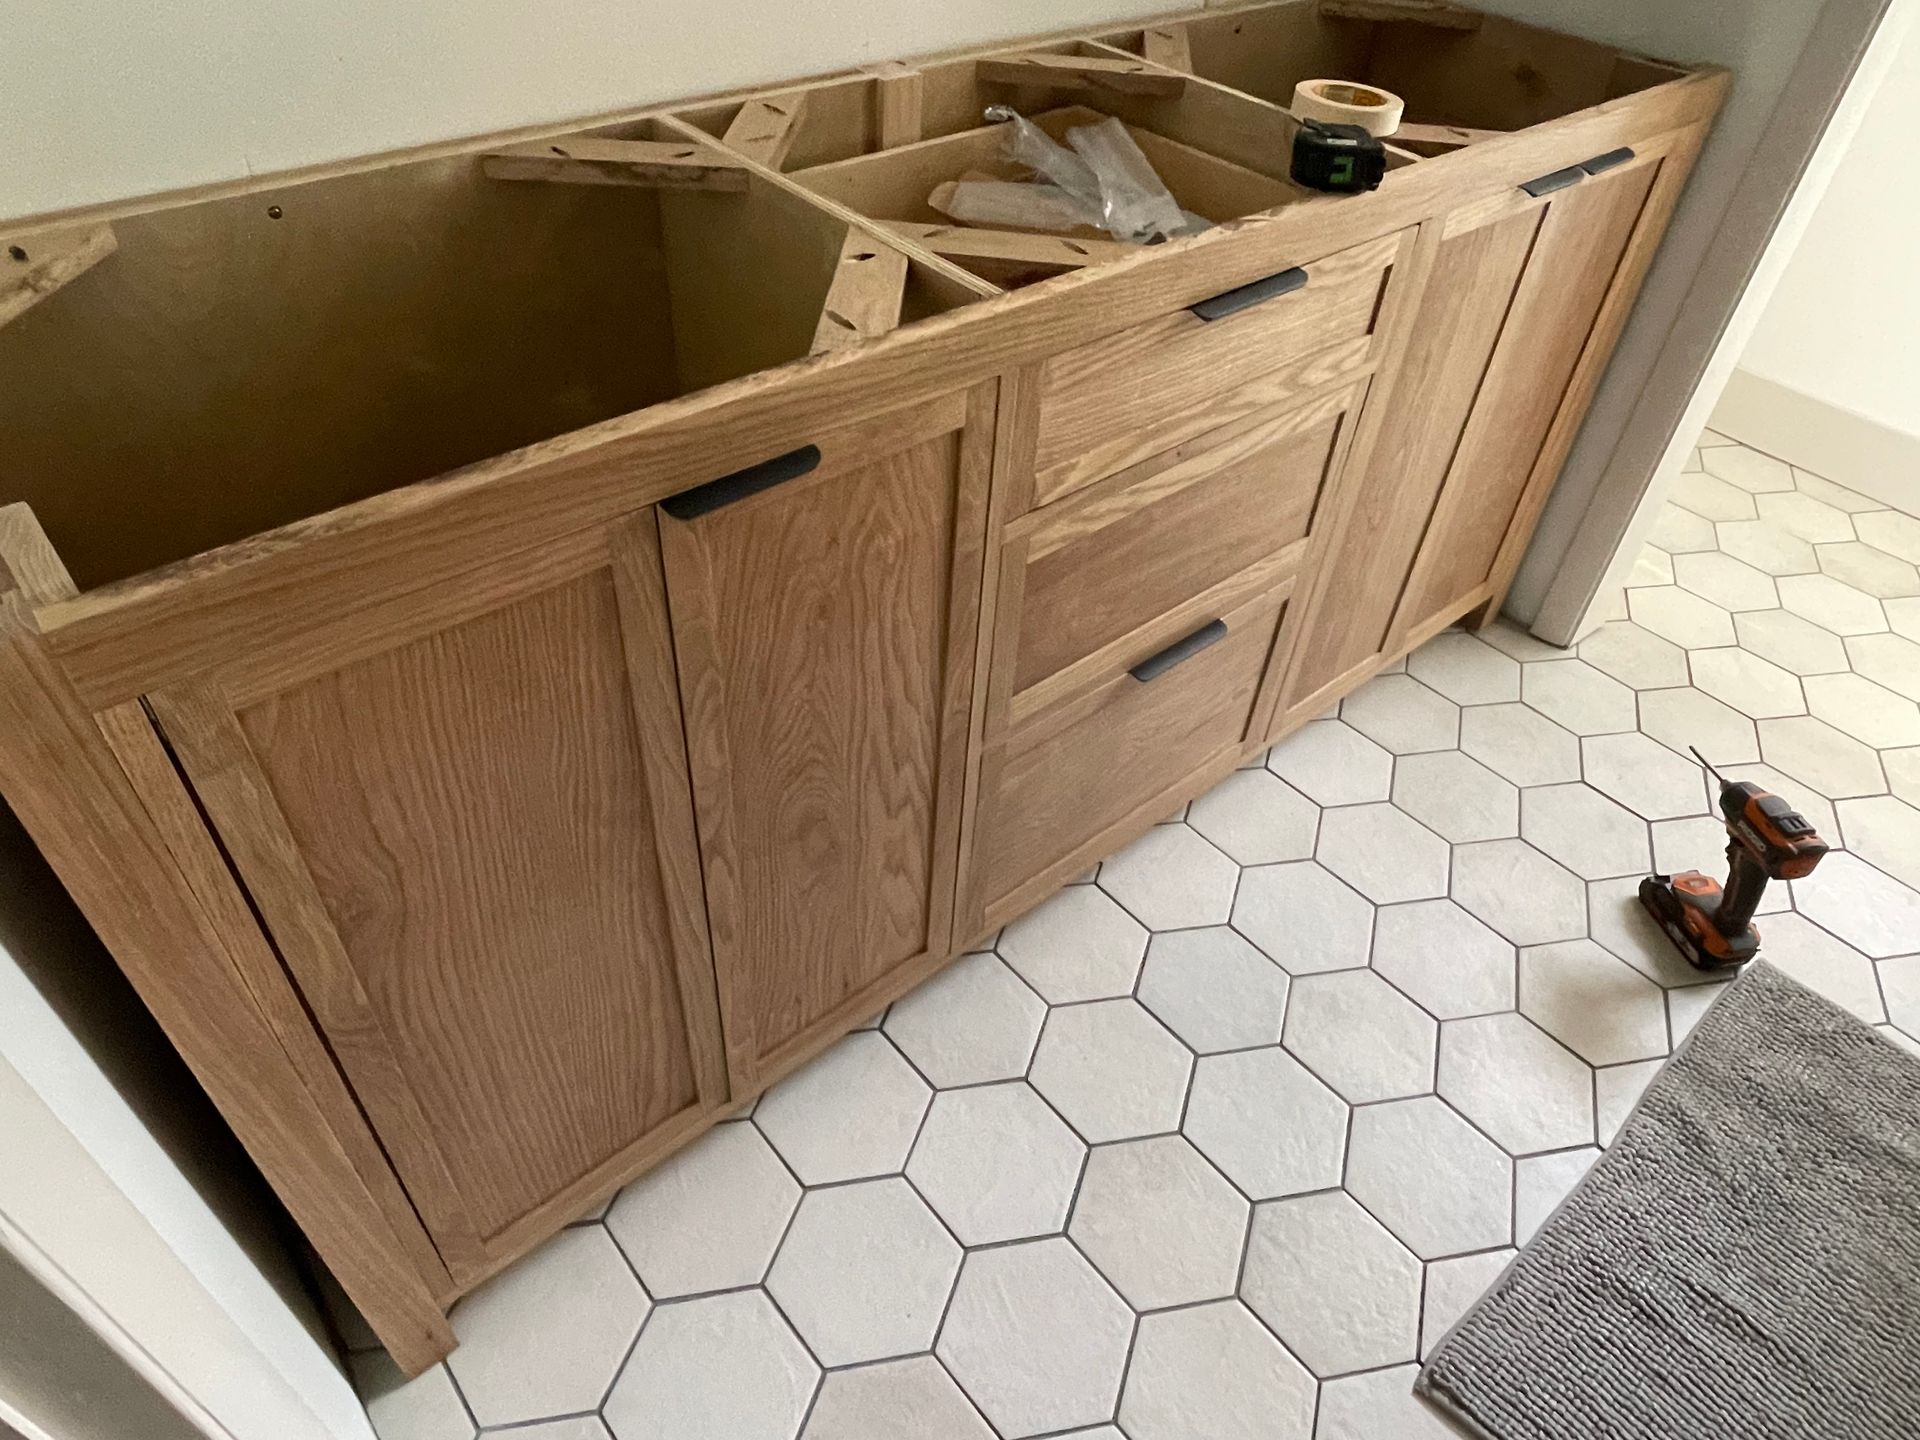 A wooden cabinet is being built in a bathroom.